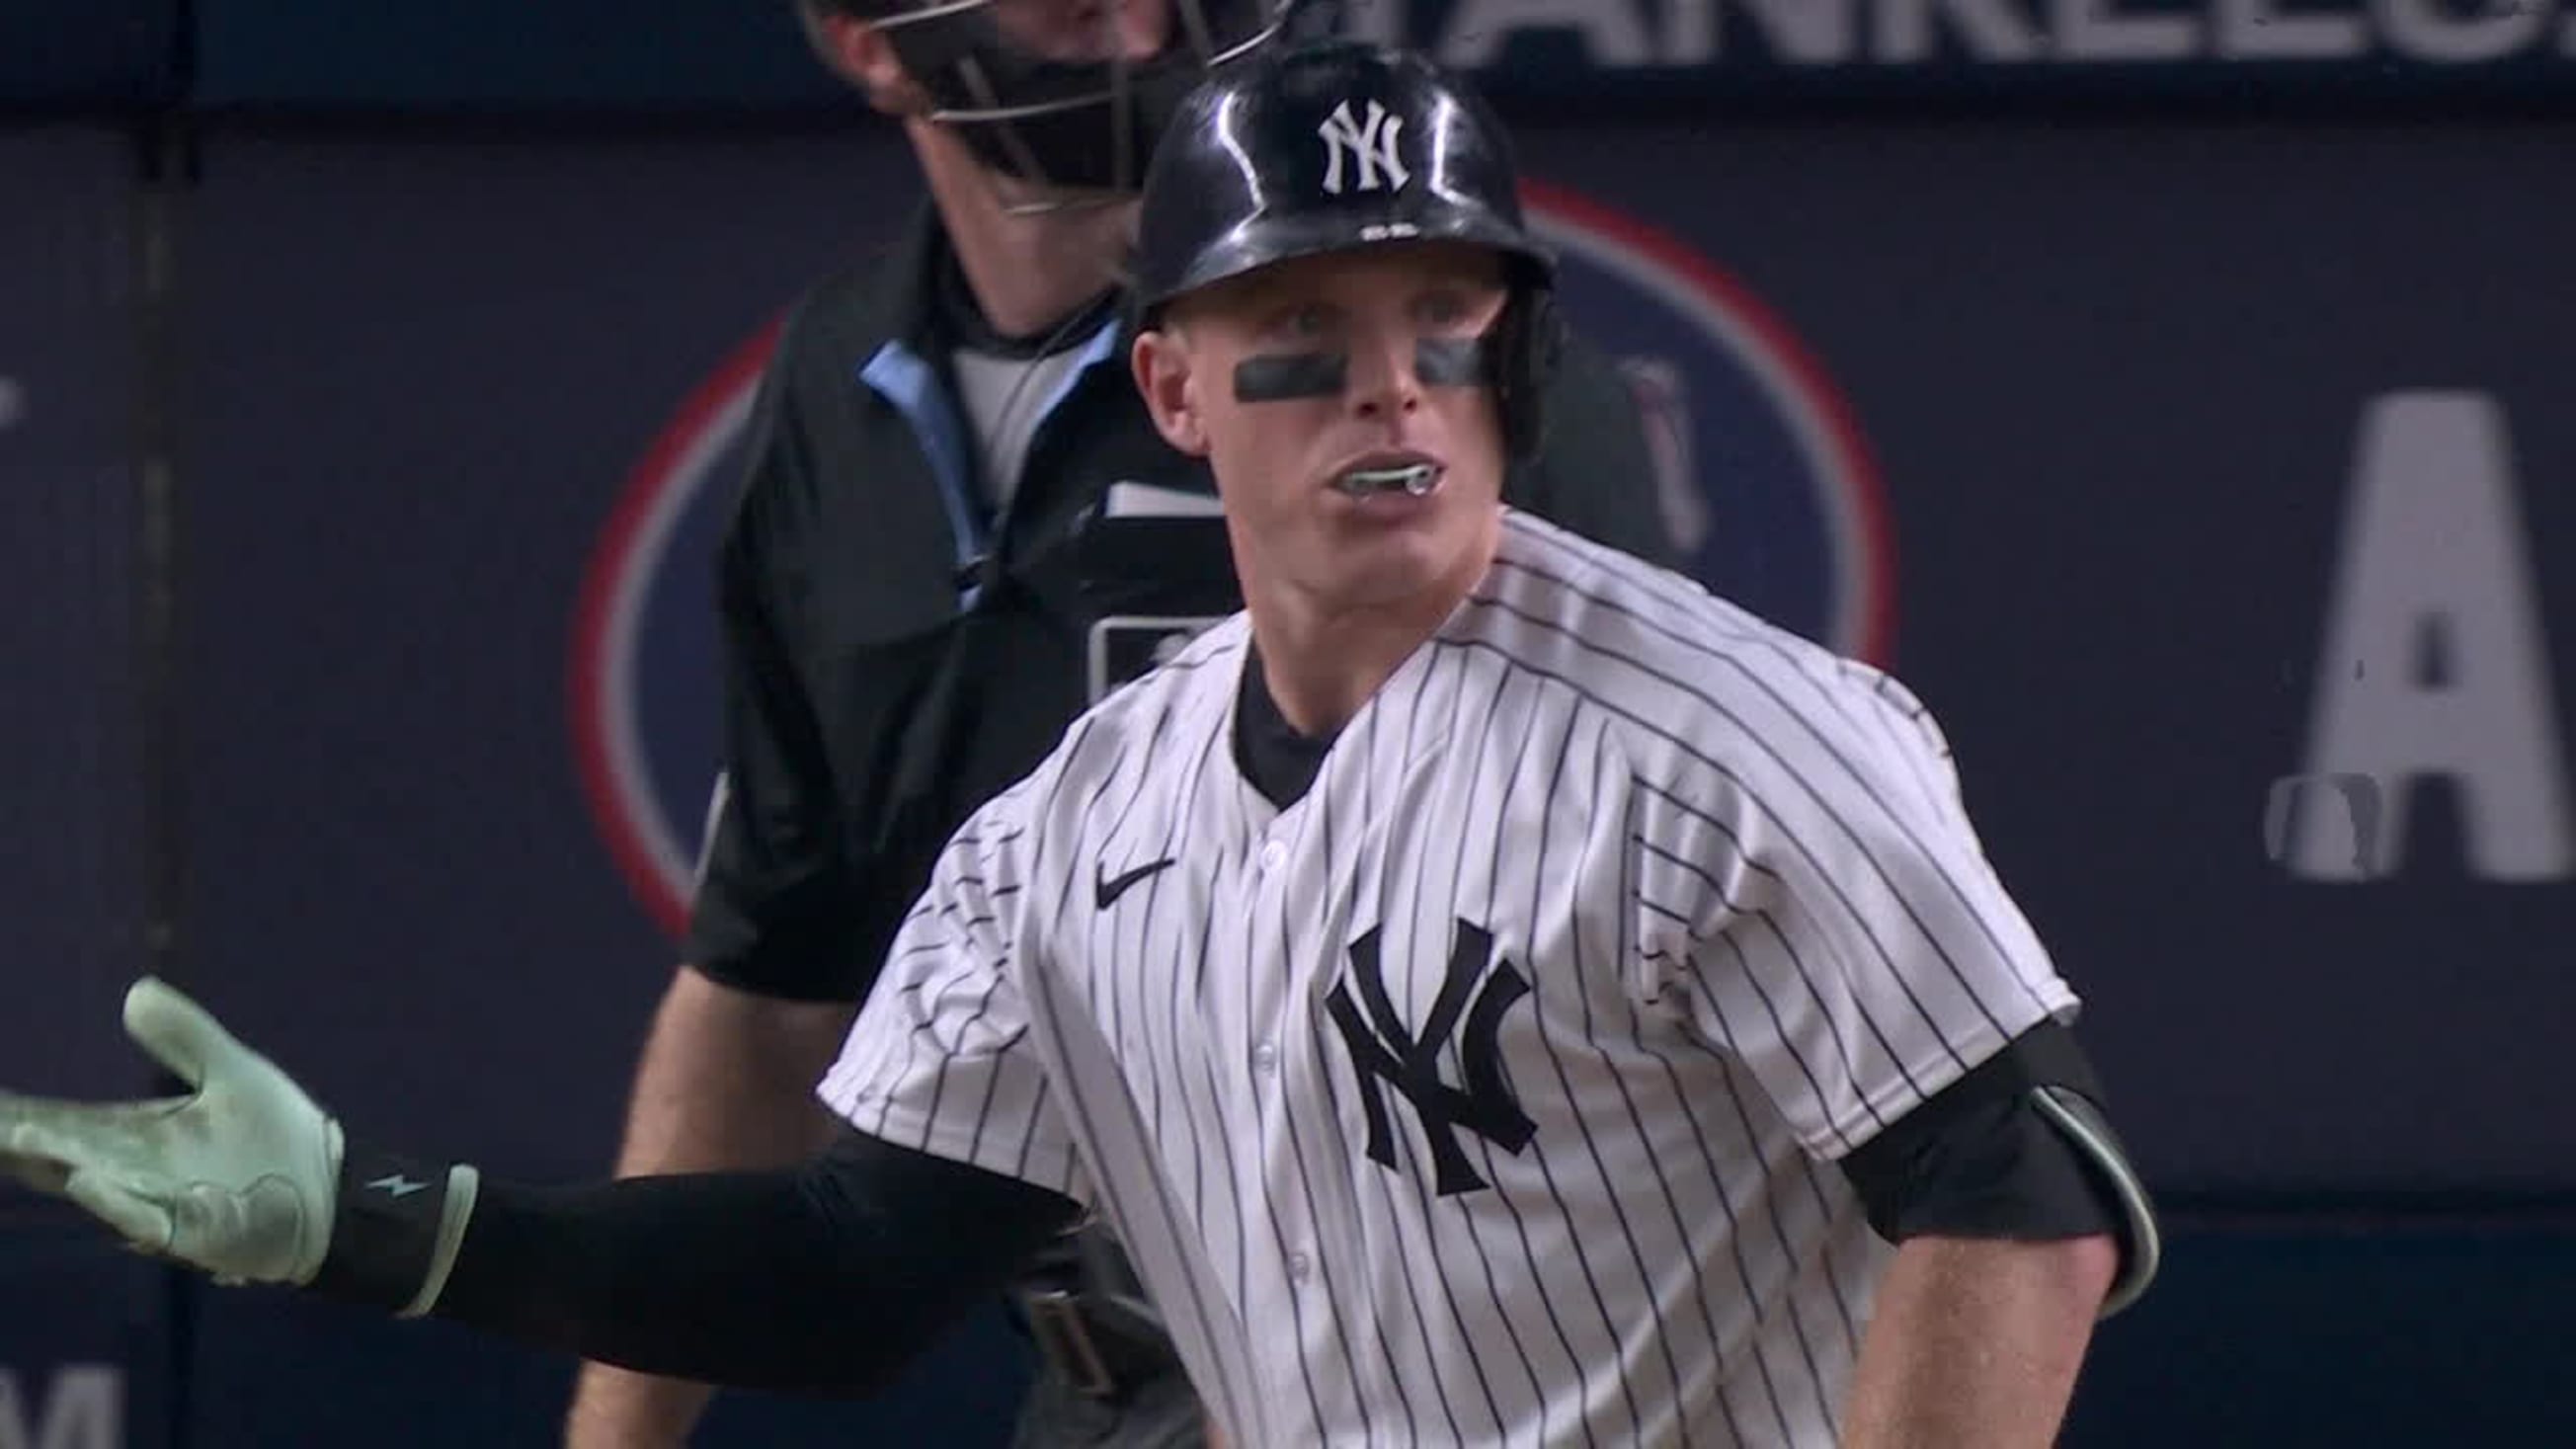 Bader hits a 3-run homer in the 8th inning as the Yankees rally